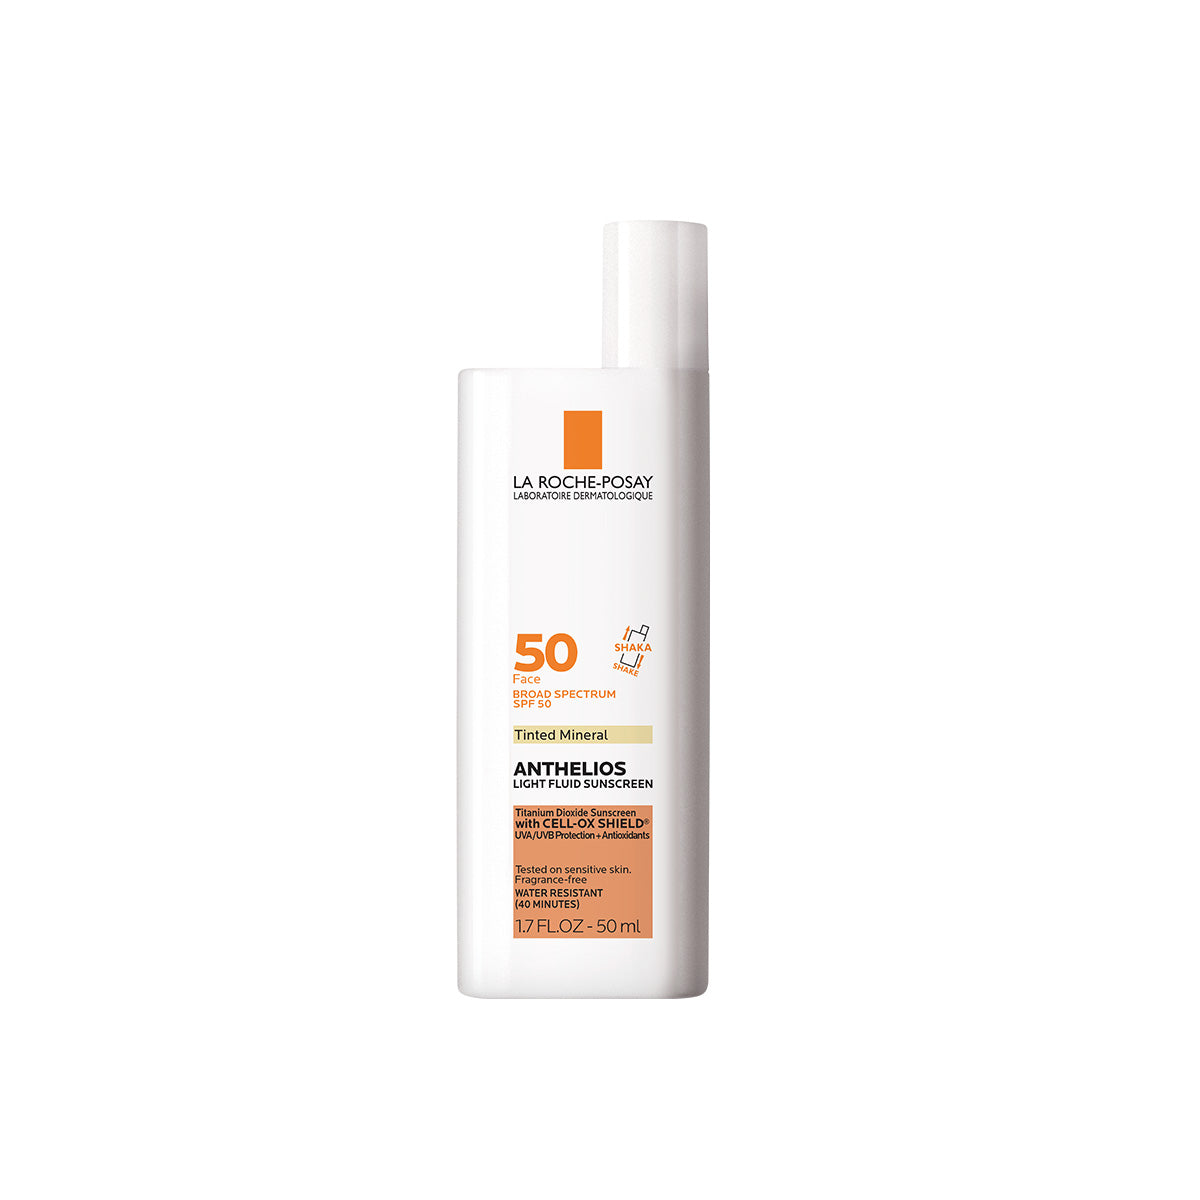 La Roche-Posay 50 Face Broad Spectrum SPF 50 Tinted Mineral Anthelios Light Fluid Sunscreen Front view stock image